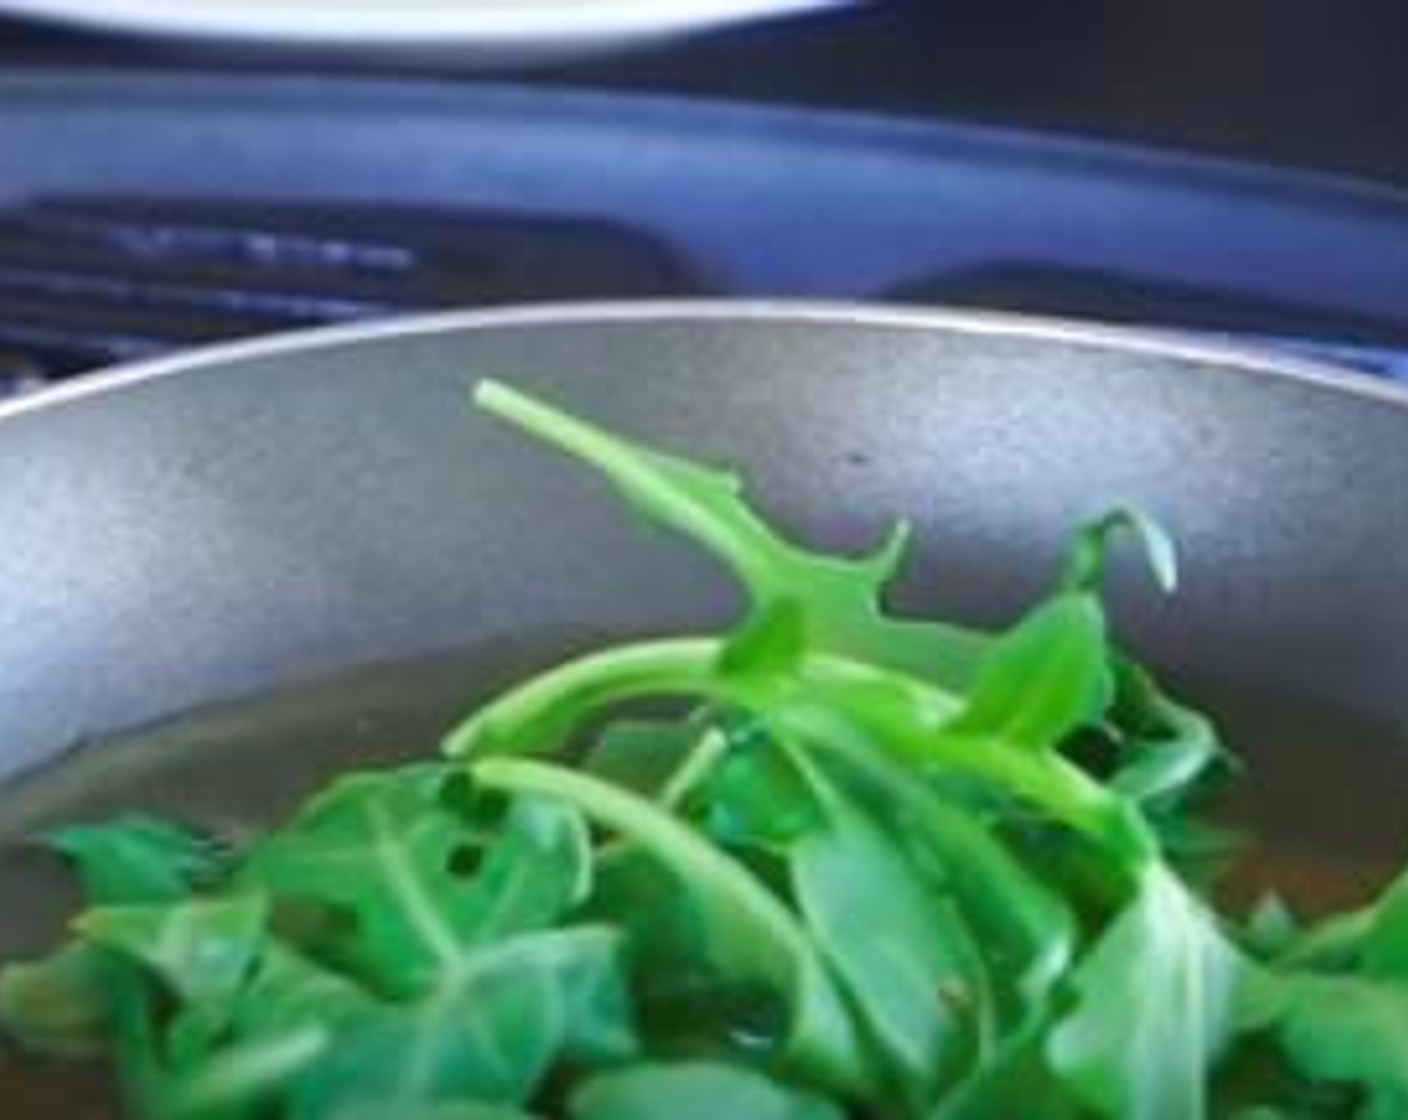 step 7 Fill a small frying pan with Olive Oil (as needed) and add the Arugula (2 1/2 cups). Fry this on the BBQ until you notice the leaves become dark green. Using tongs, remove each leaf from the pan and place them onto paper towels so excess oil is removed.